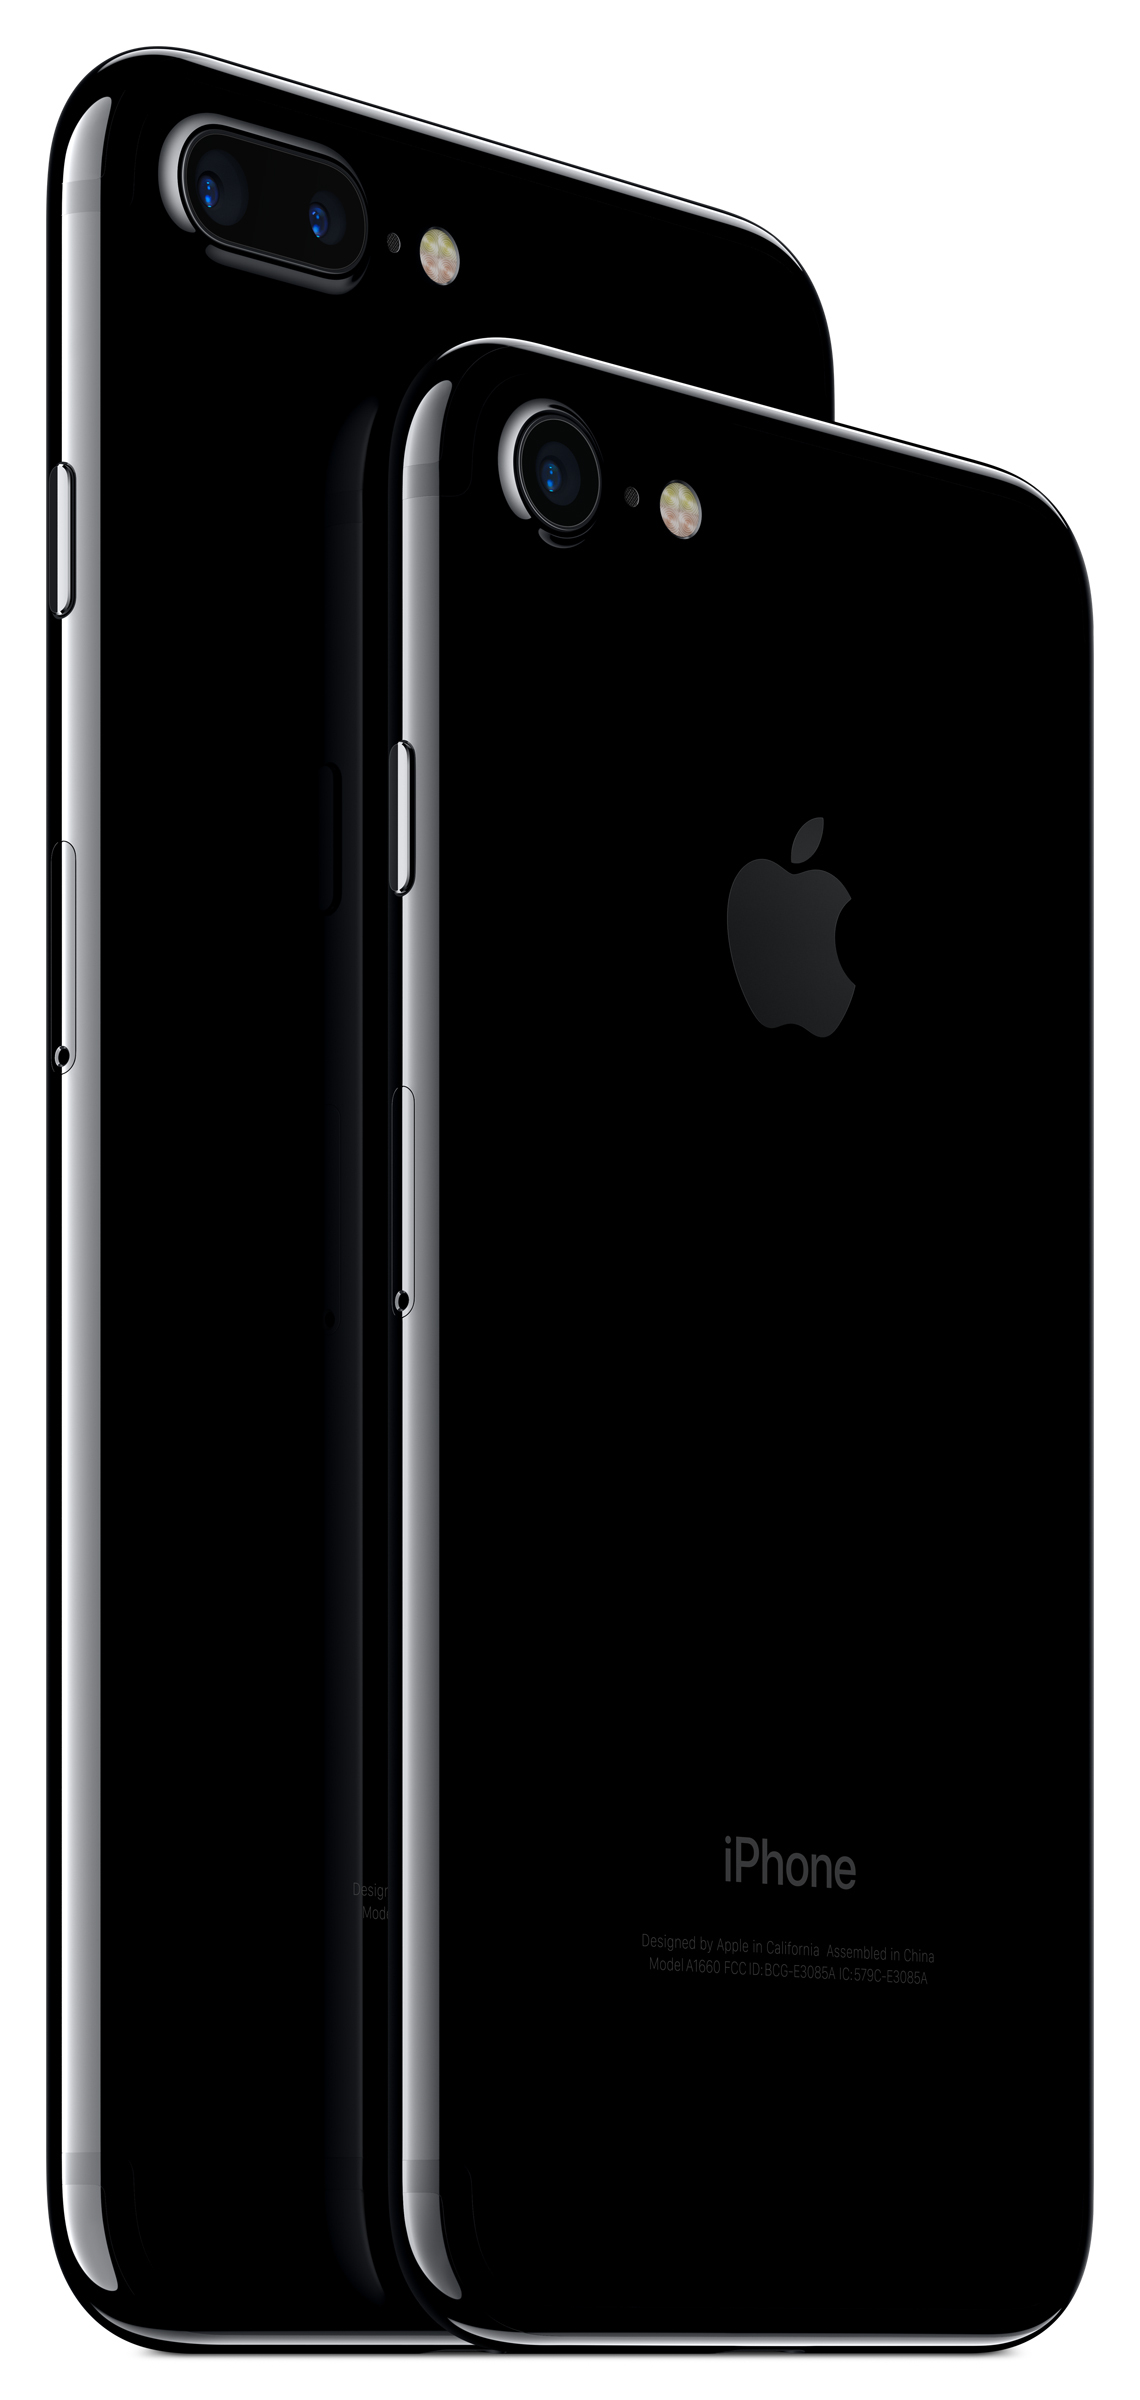 iPhone 7: The Best iPhone Ever? - Strata-gee.com